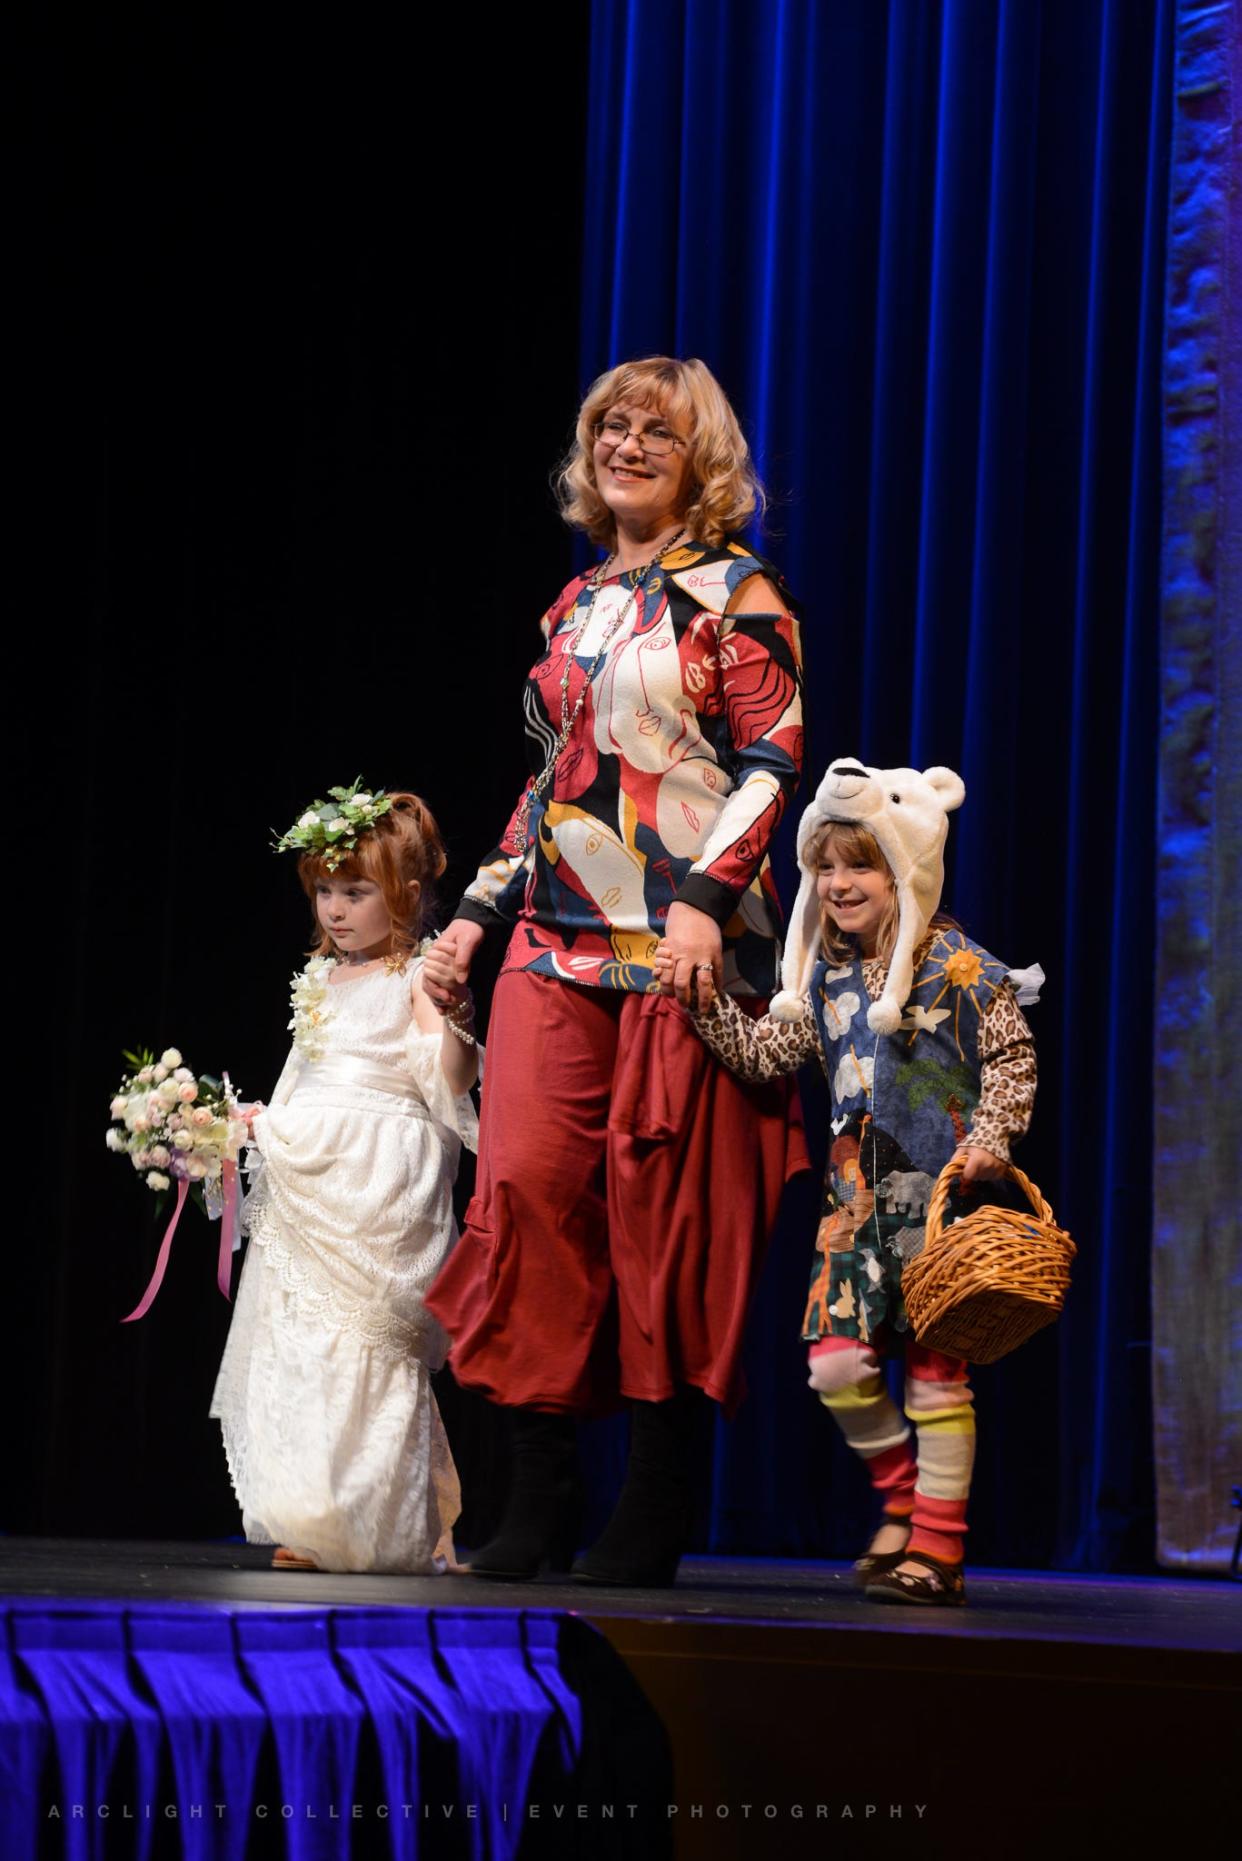 Tatyana Kuzmina wears an outfit made for the ReFashion category in 2017's Trashion ReFashion Runway Show from a dress with a Picasso pattern. Her granddaughter, Valeria, wears a dress made from two skirts that Kuxmina used in past shows. Her other model, Hannah, right, wears a look inspired and made from an adult vest with animal applique.